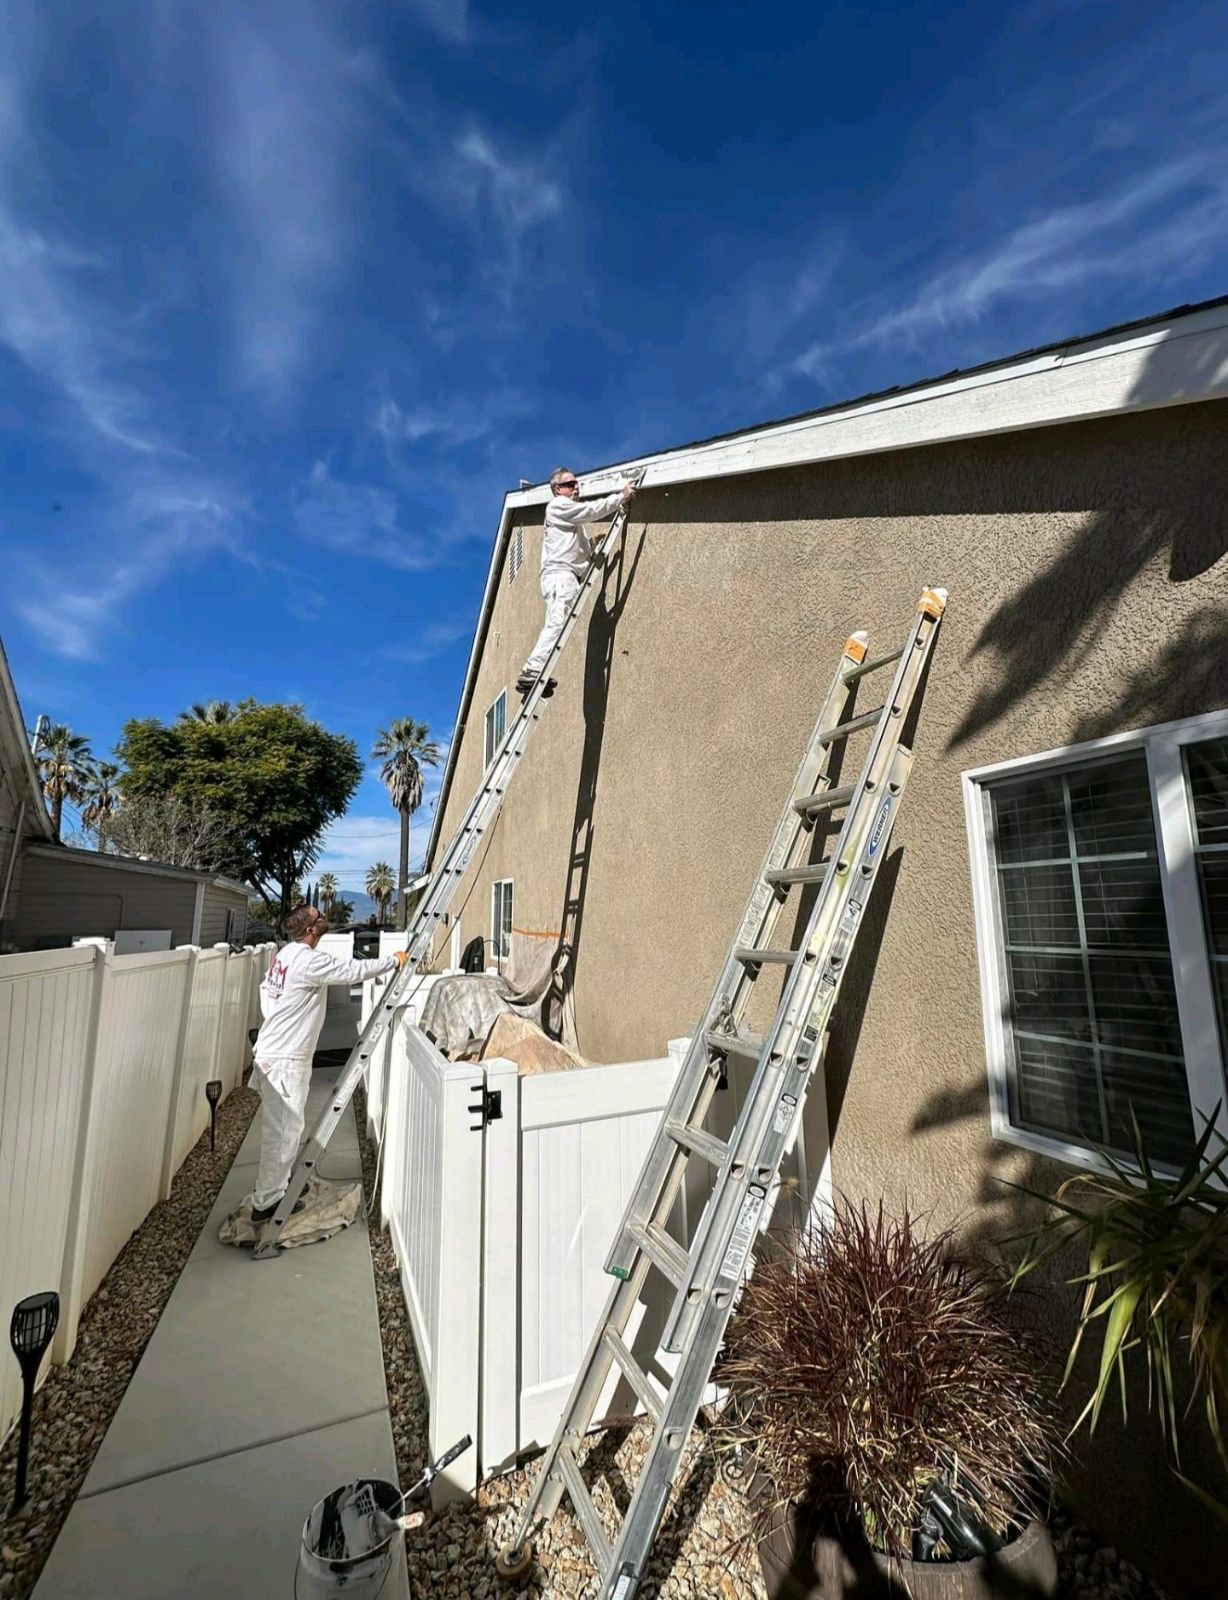 Damien is painting the side of a house with a ladder in Redlands CA .